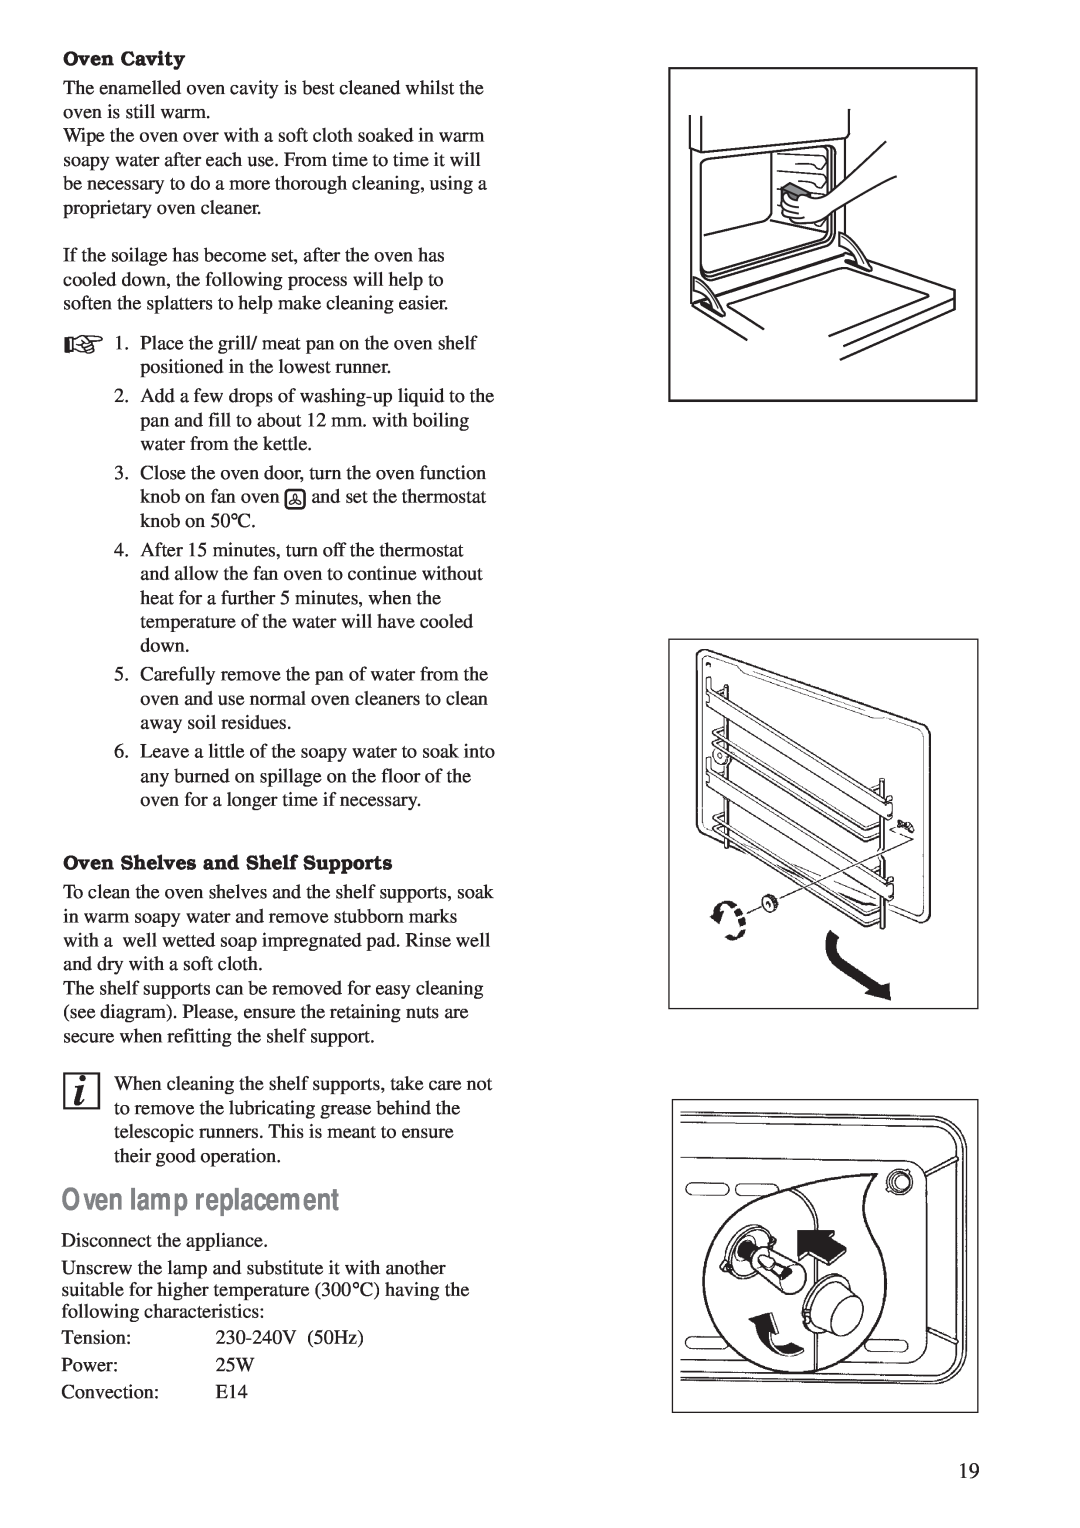 Zanussi ZCM 700 X manual Oven lamp replacement, Oven Cavity, Oven Shelves and Shelf Supports 